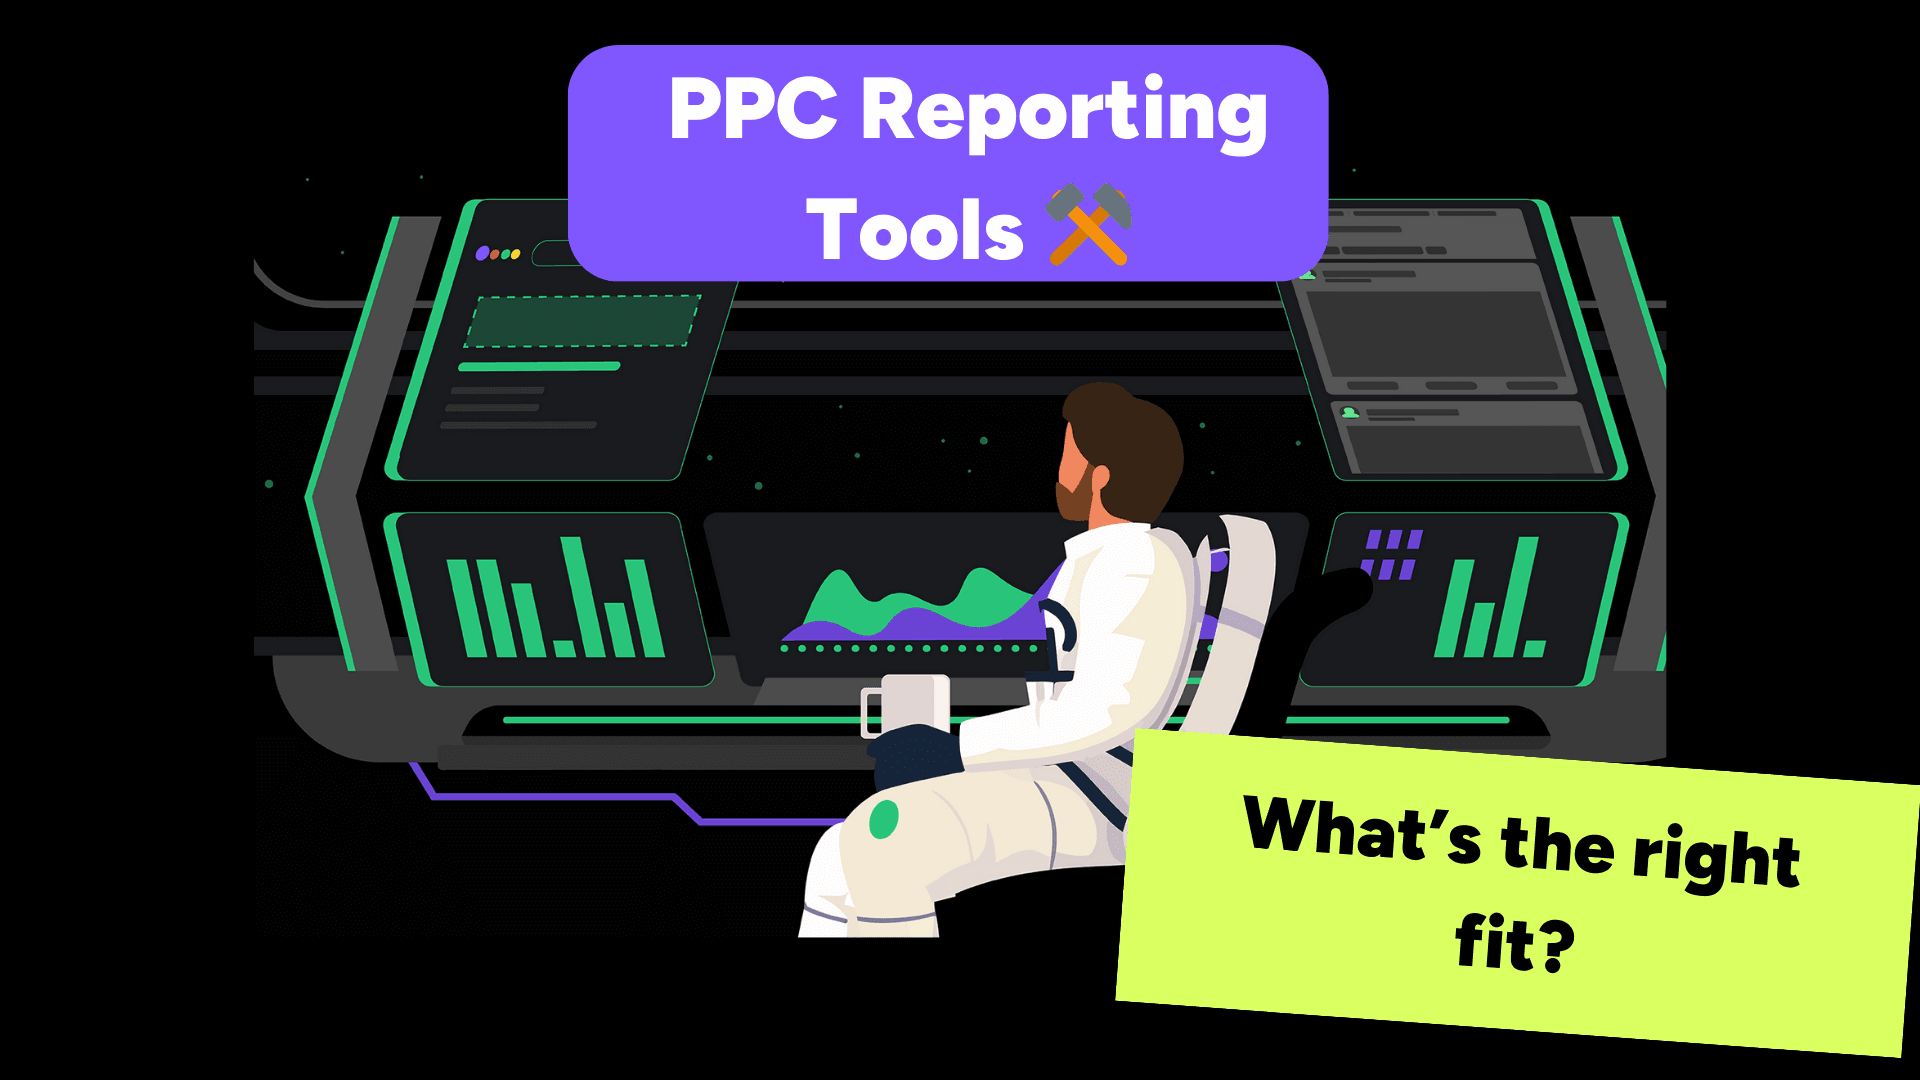 ppc reporting tools cover image